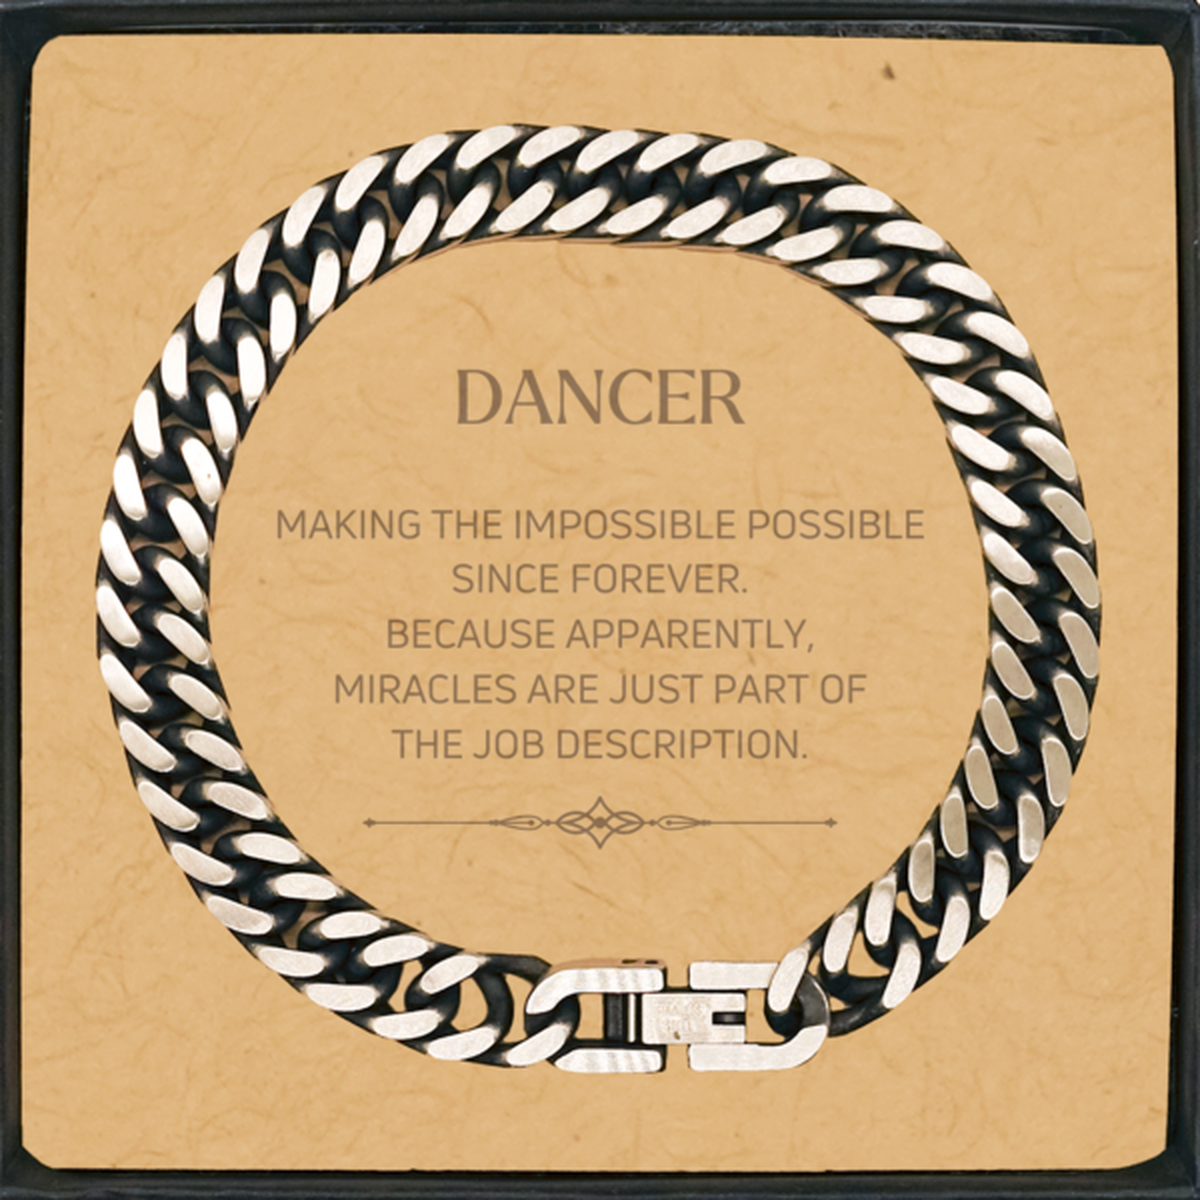 Funny Dancer Gifts, Miracles are just part of the job description, Inspirational Birthday Cuban Link Chain Bracelet For Dancer, Men, Women, Coworkers, Friends, Boss